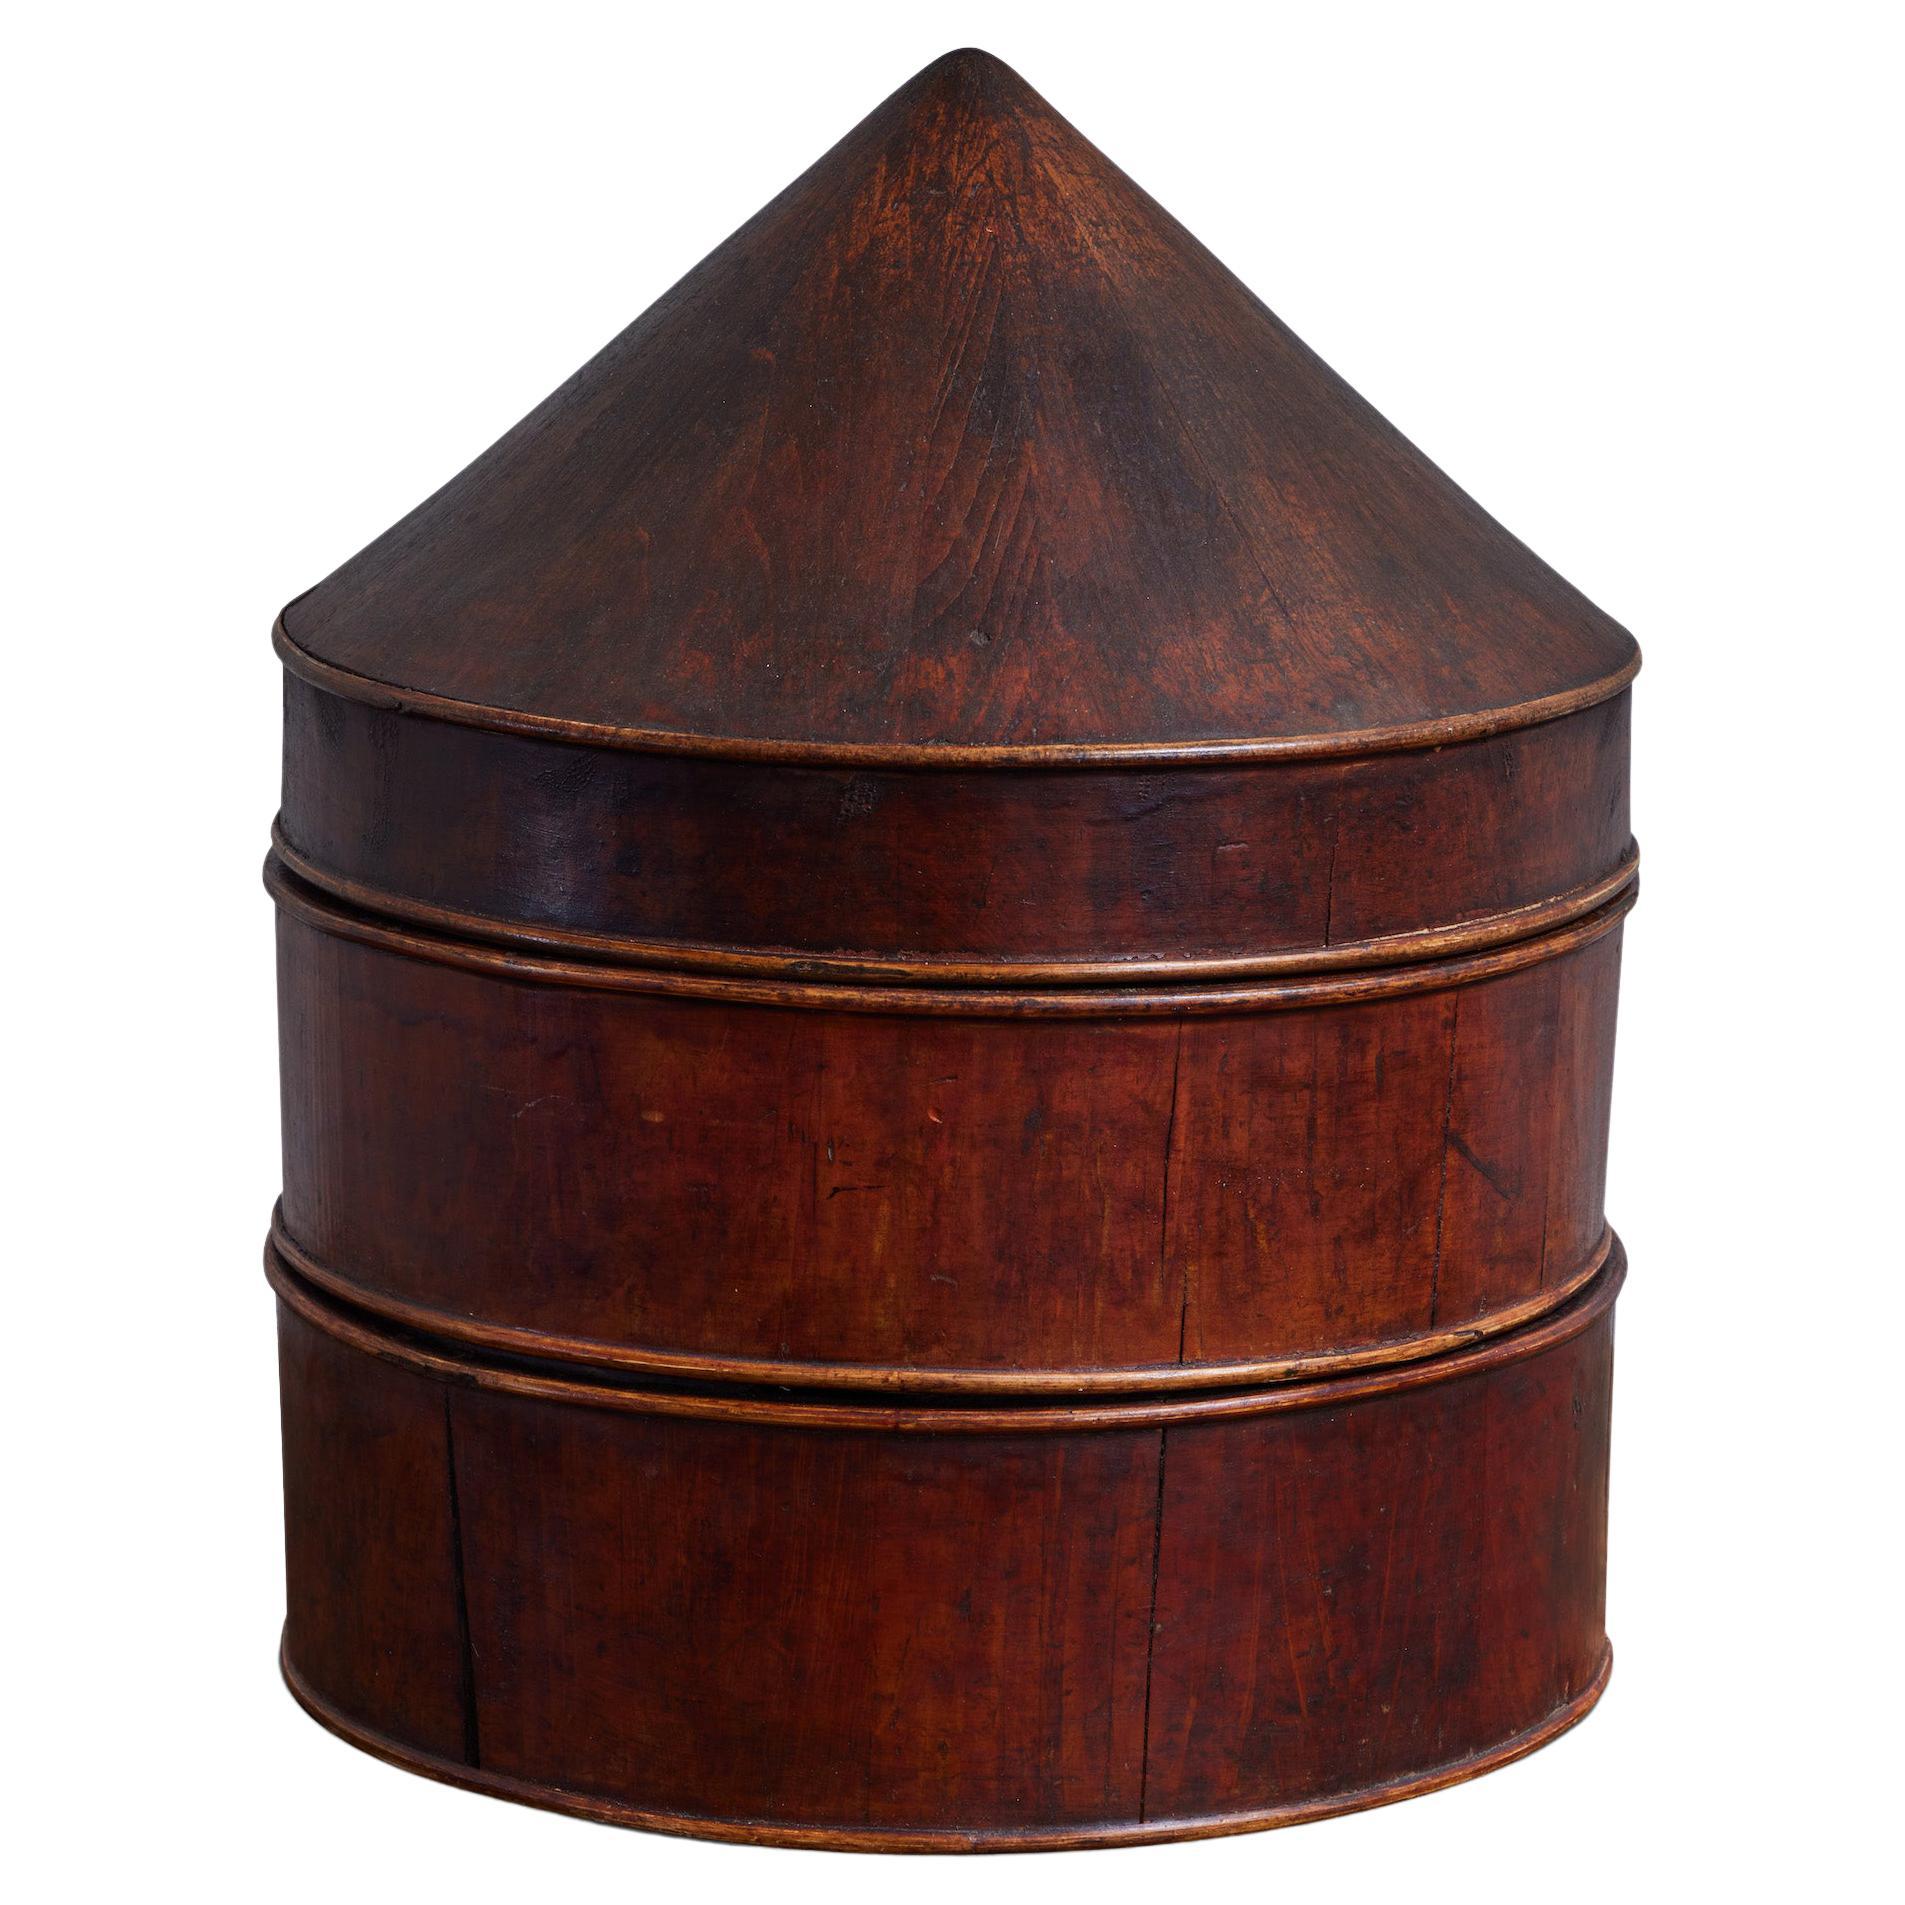 Tiered Chinese Hat Box